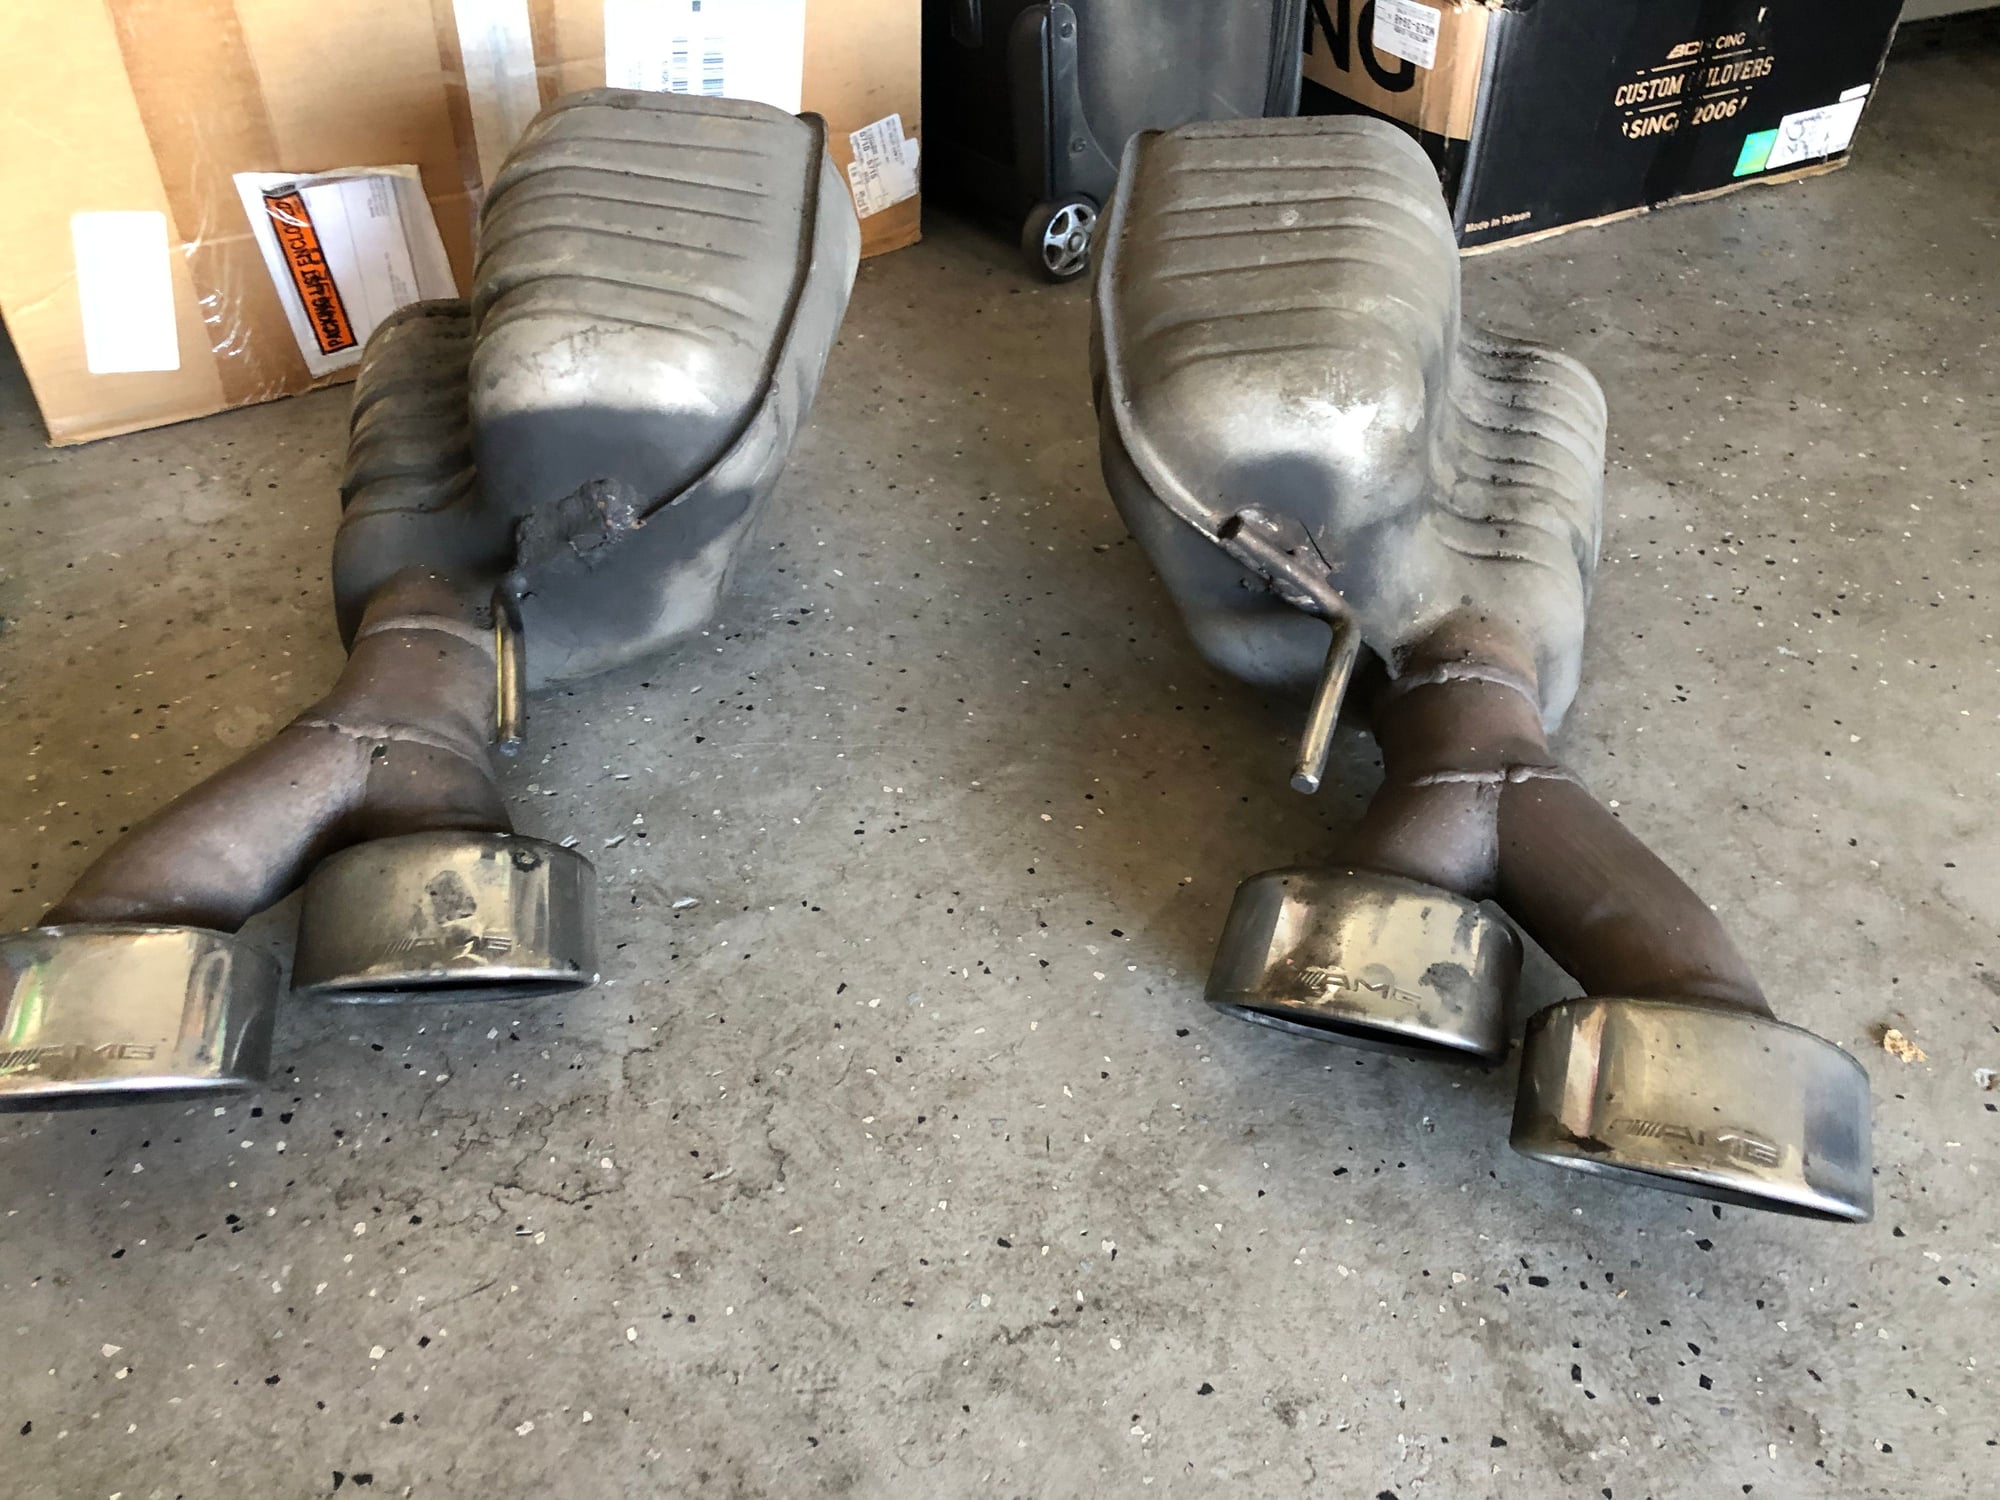 Engine - Exhaust - Sl55 mufflers/tips for sale - Used - Cypress, CA 90630, United States